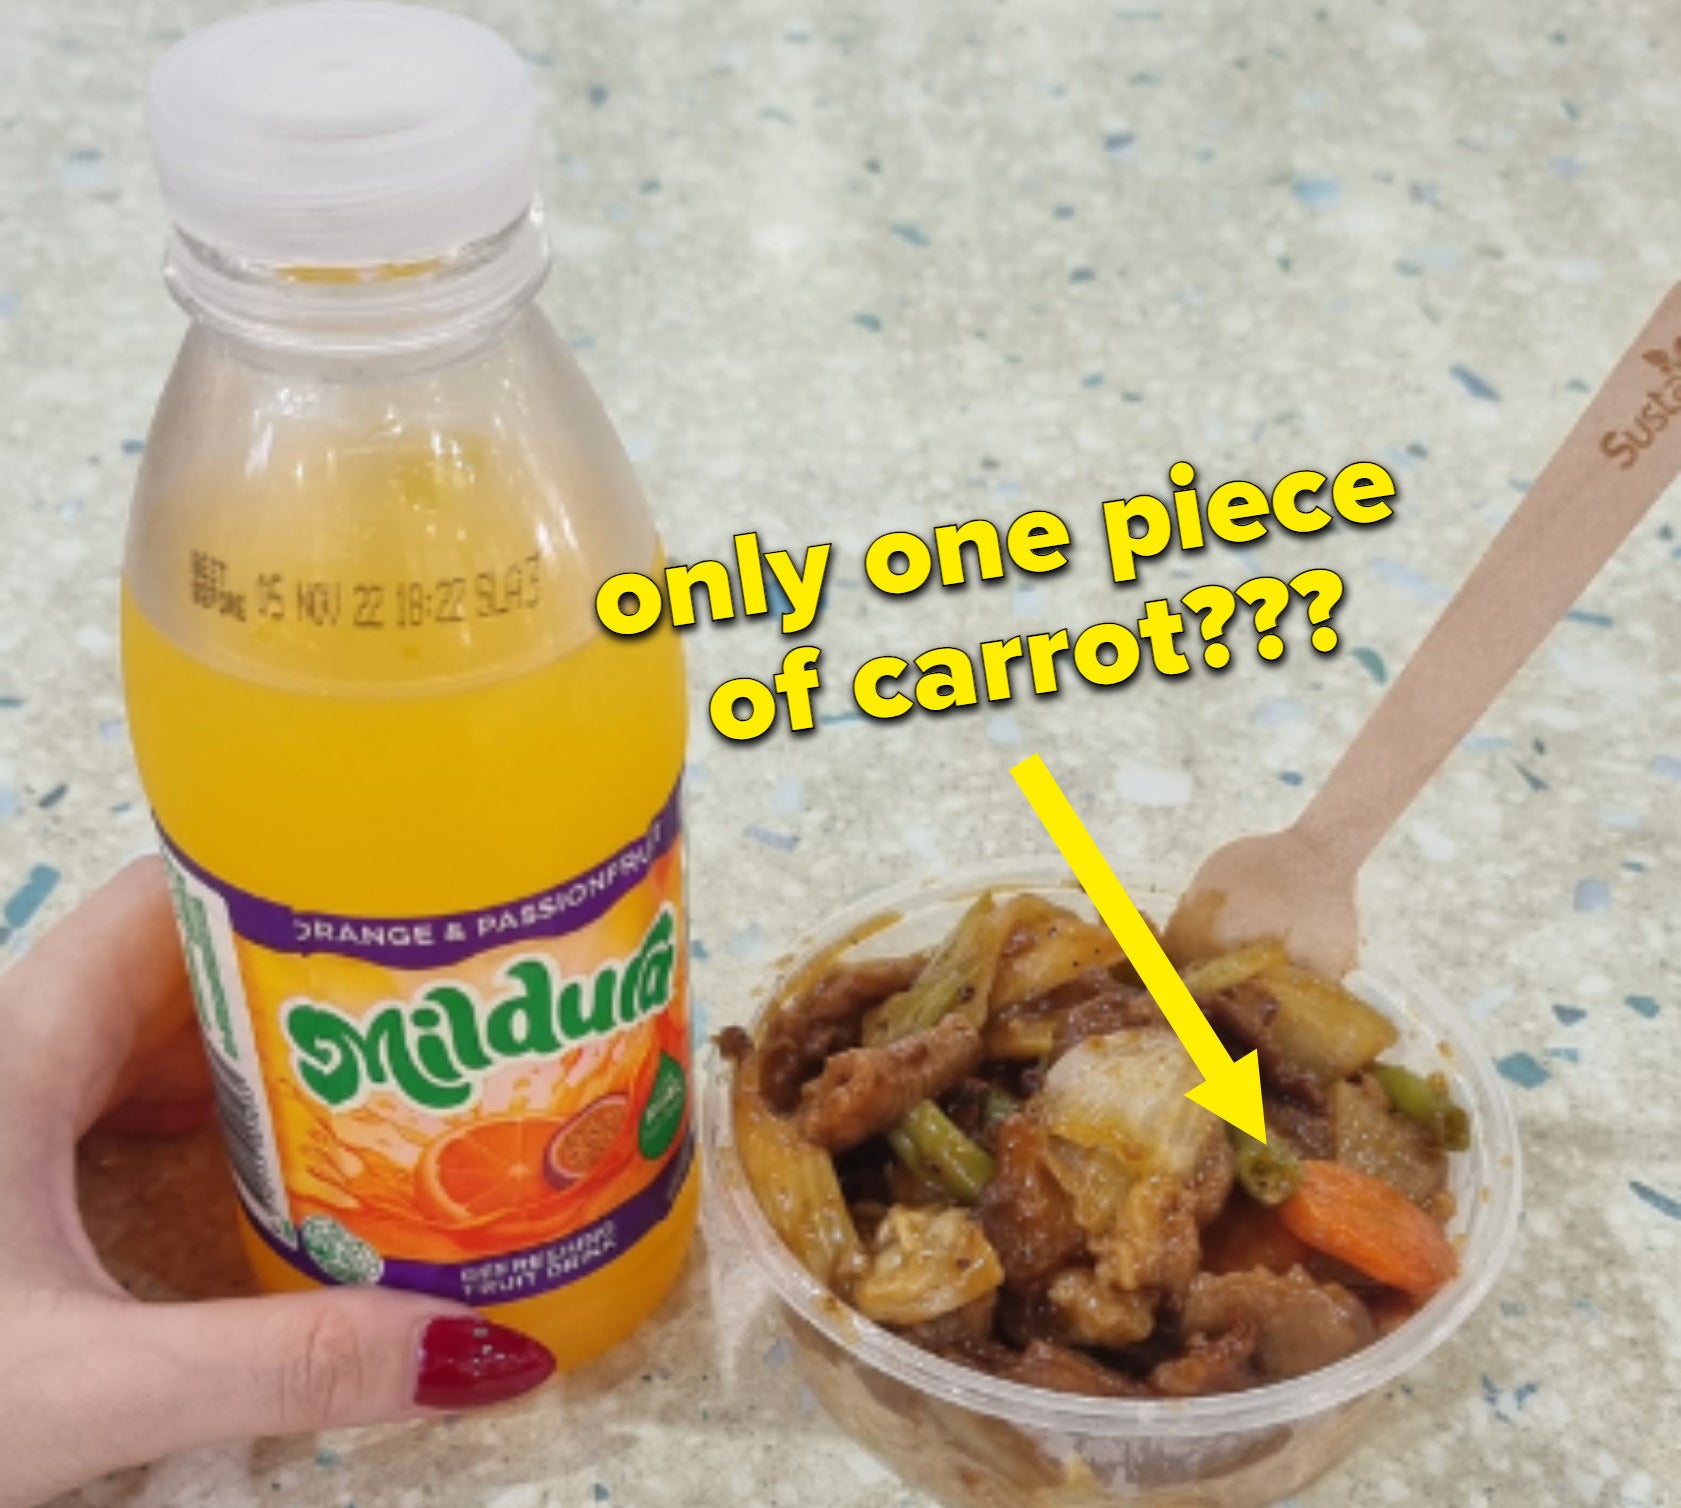 A bottle of juice and a small serving of stir-fry in a takeout container; there is an arrow and text saying &quot;only one piece of carrot?&quot;